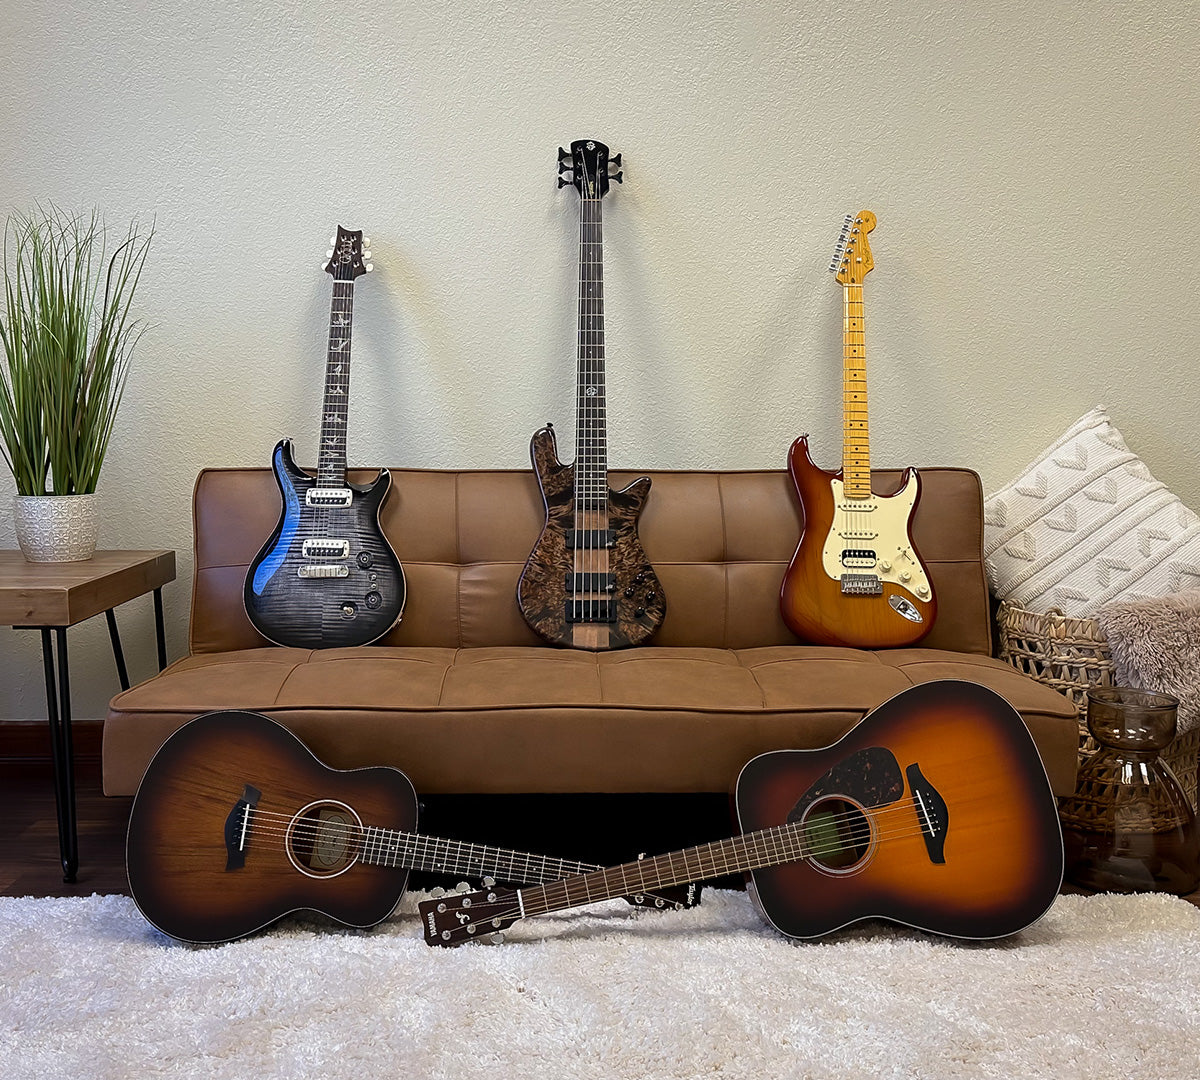 Image of guitars and basses